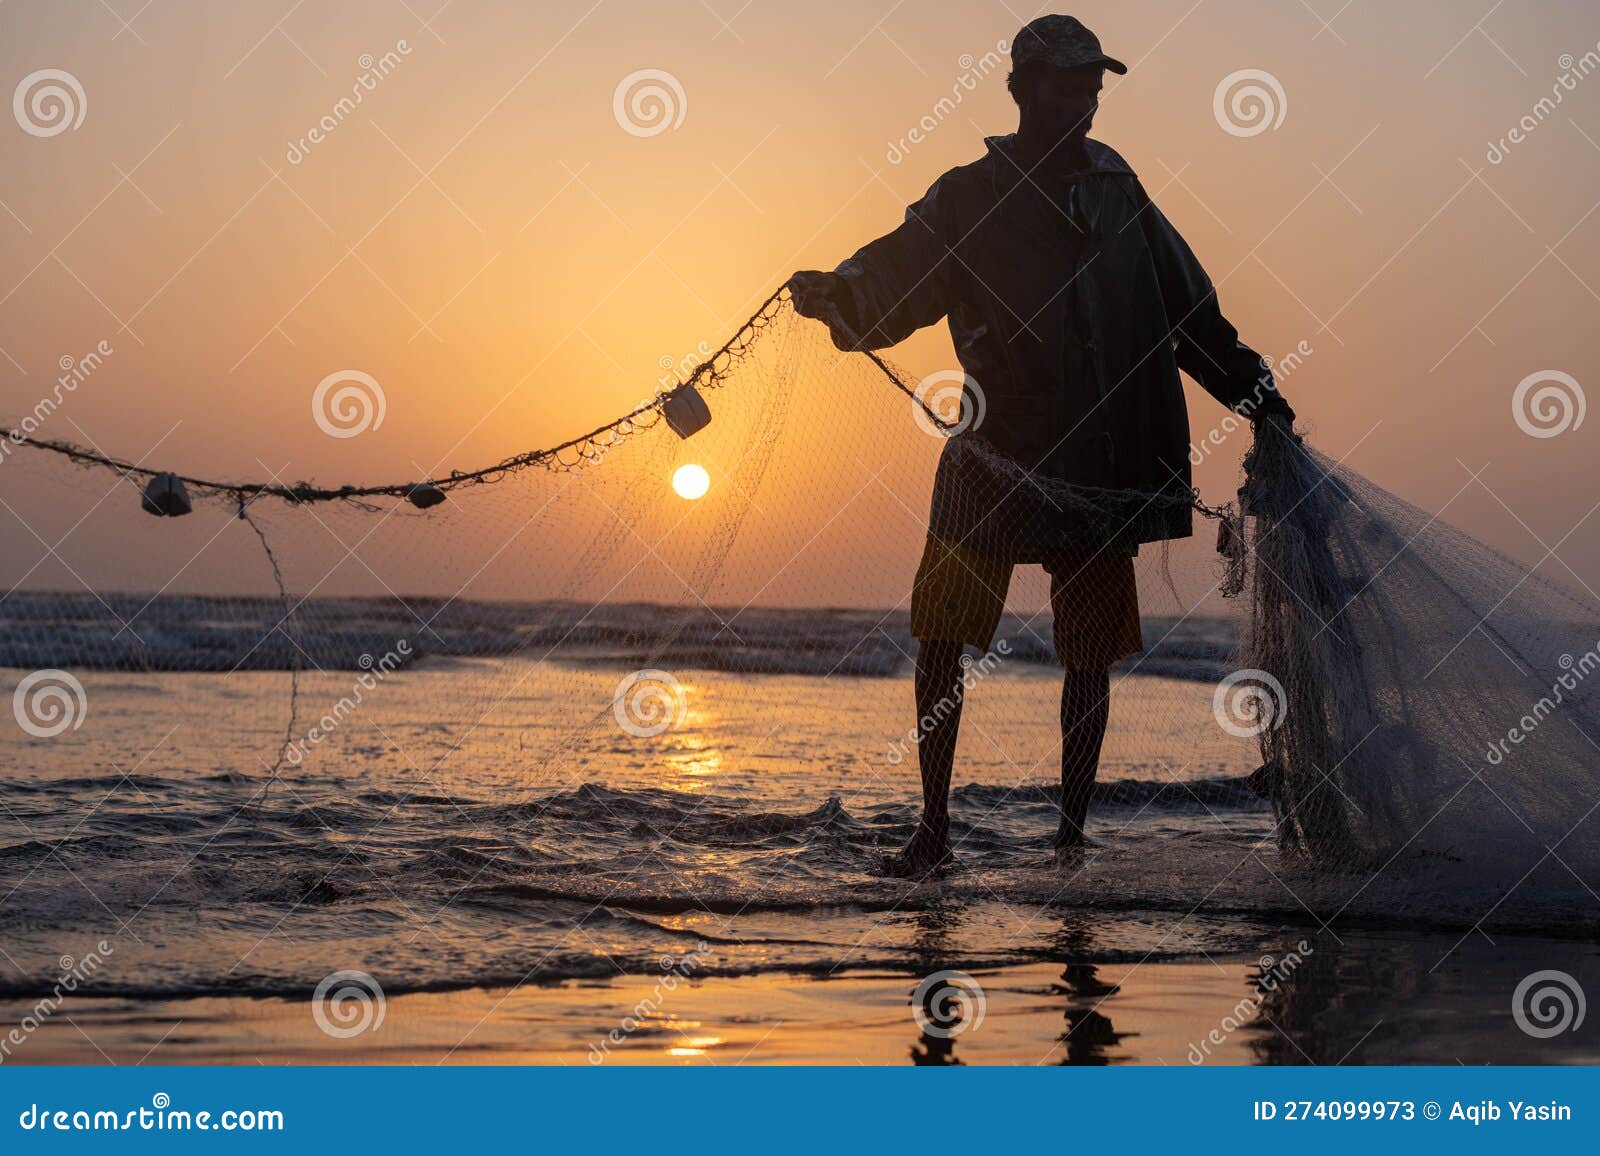 A Fisherman Preparing Fishing Net for Fishing Editorial Stock Photo - Image  of color, economy: 274099973